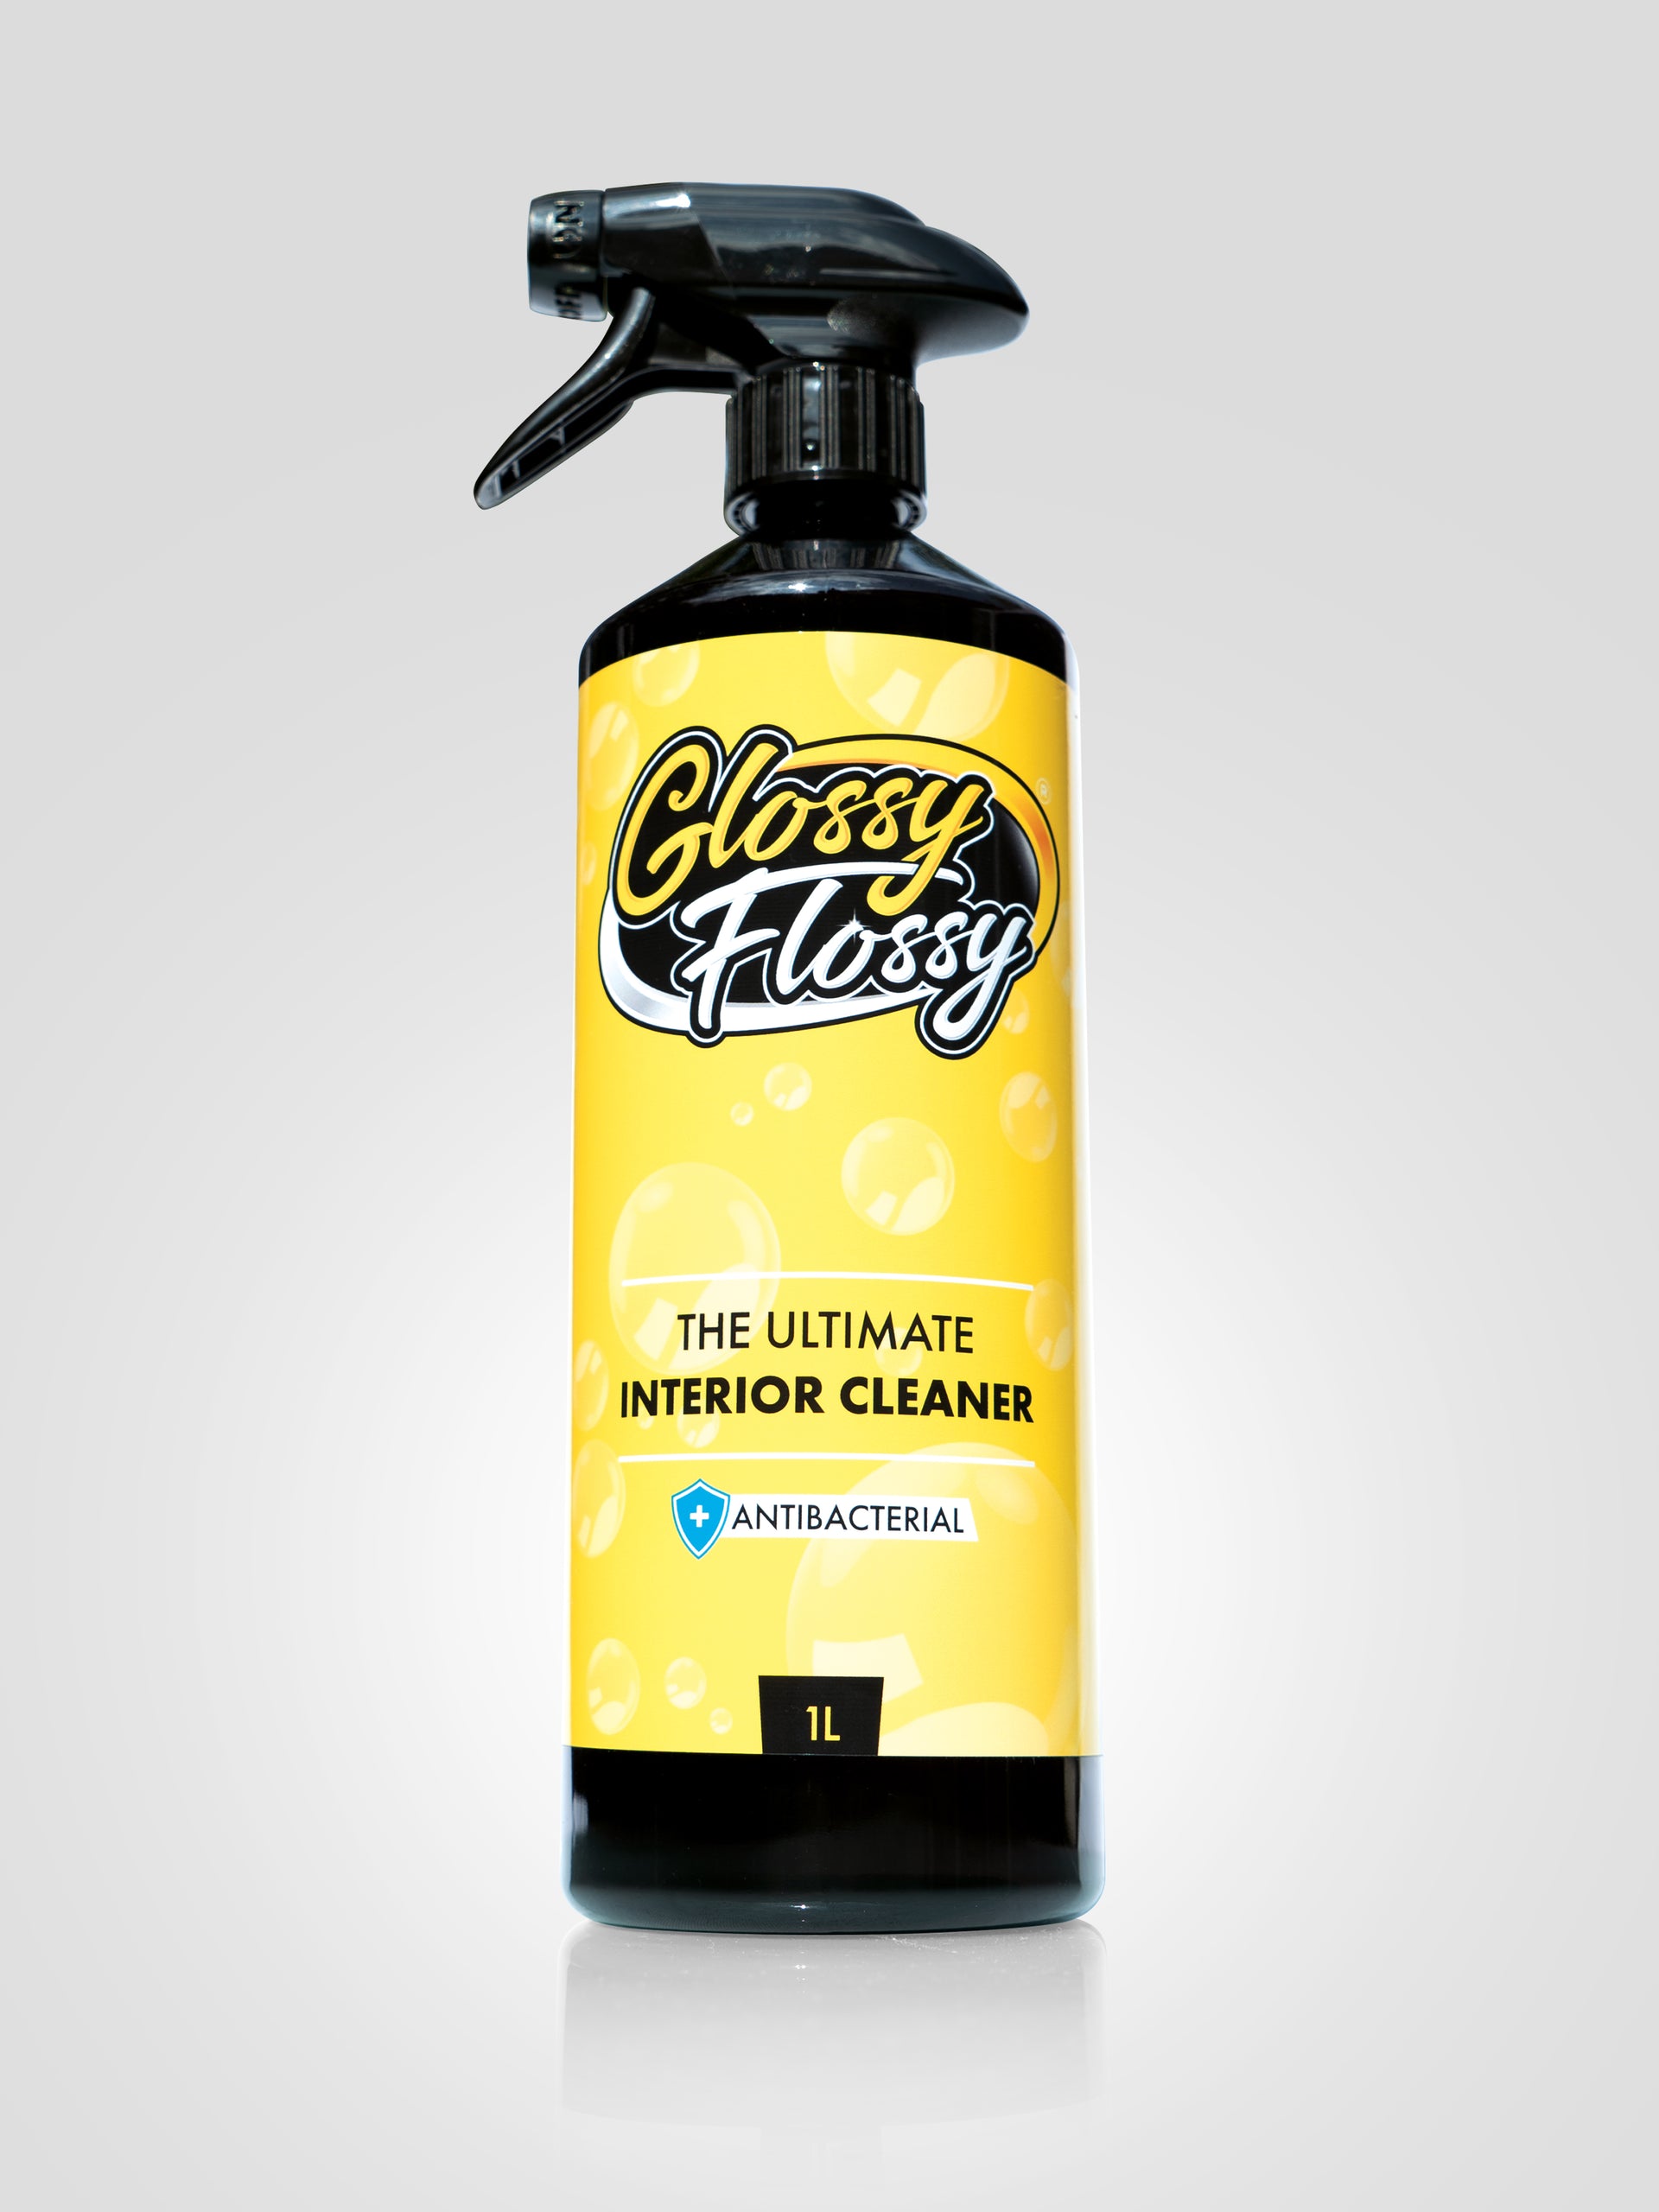 The Ultimate Interior Cleaner – Glossy Flossy